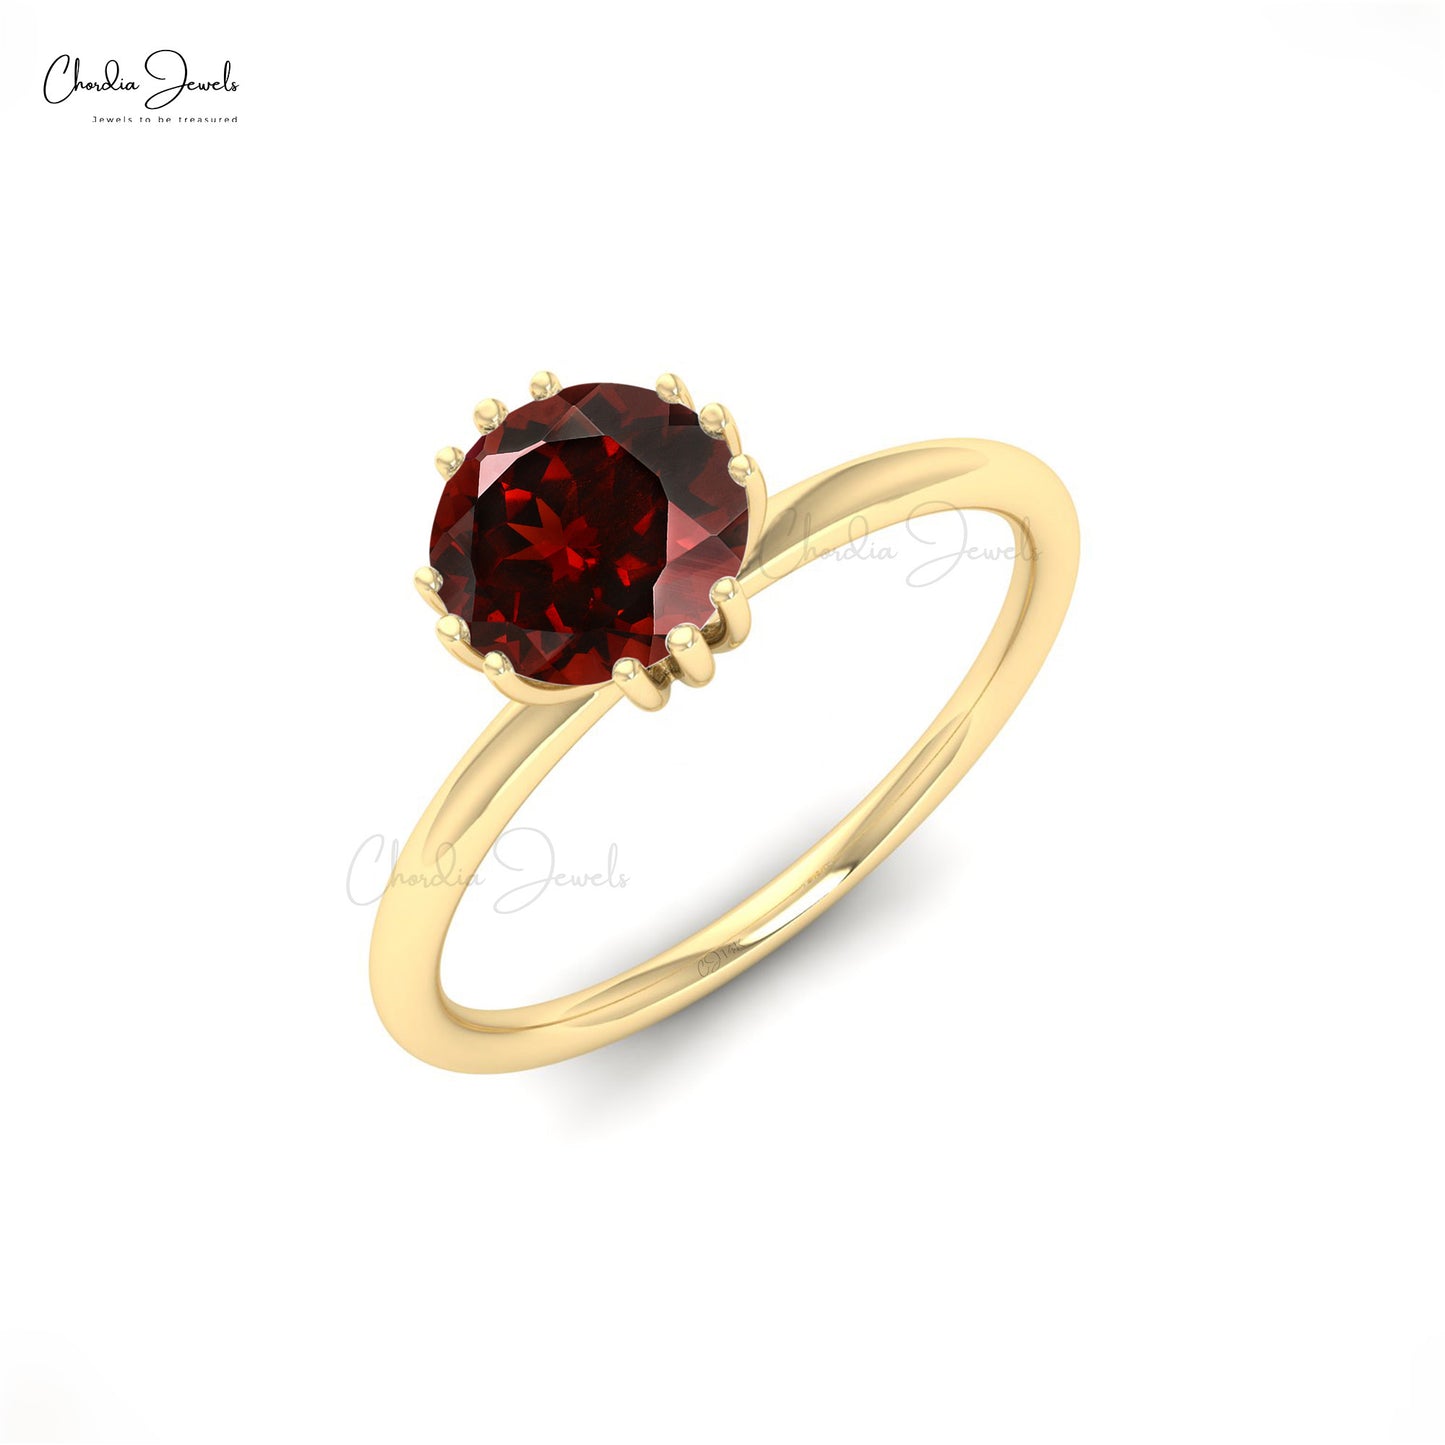 Dainty 14k Solid Gold Red Garnet Solitaire Wedding Ring